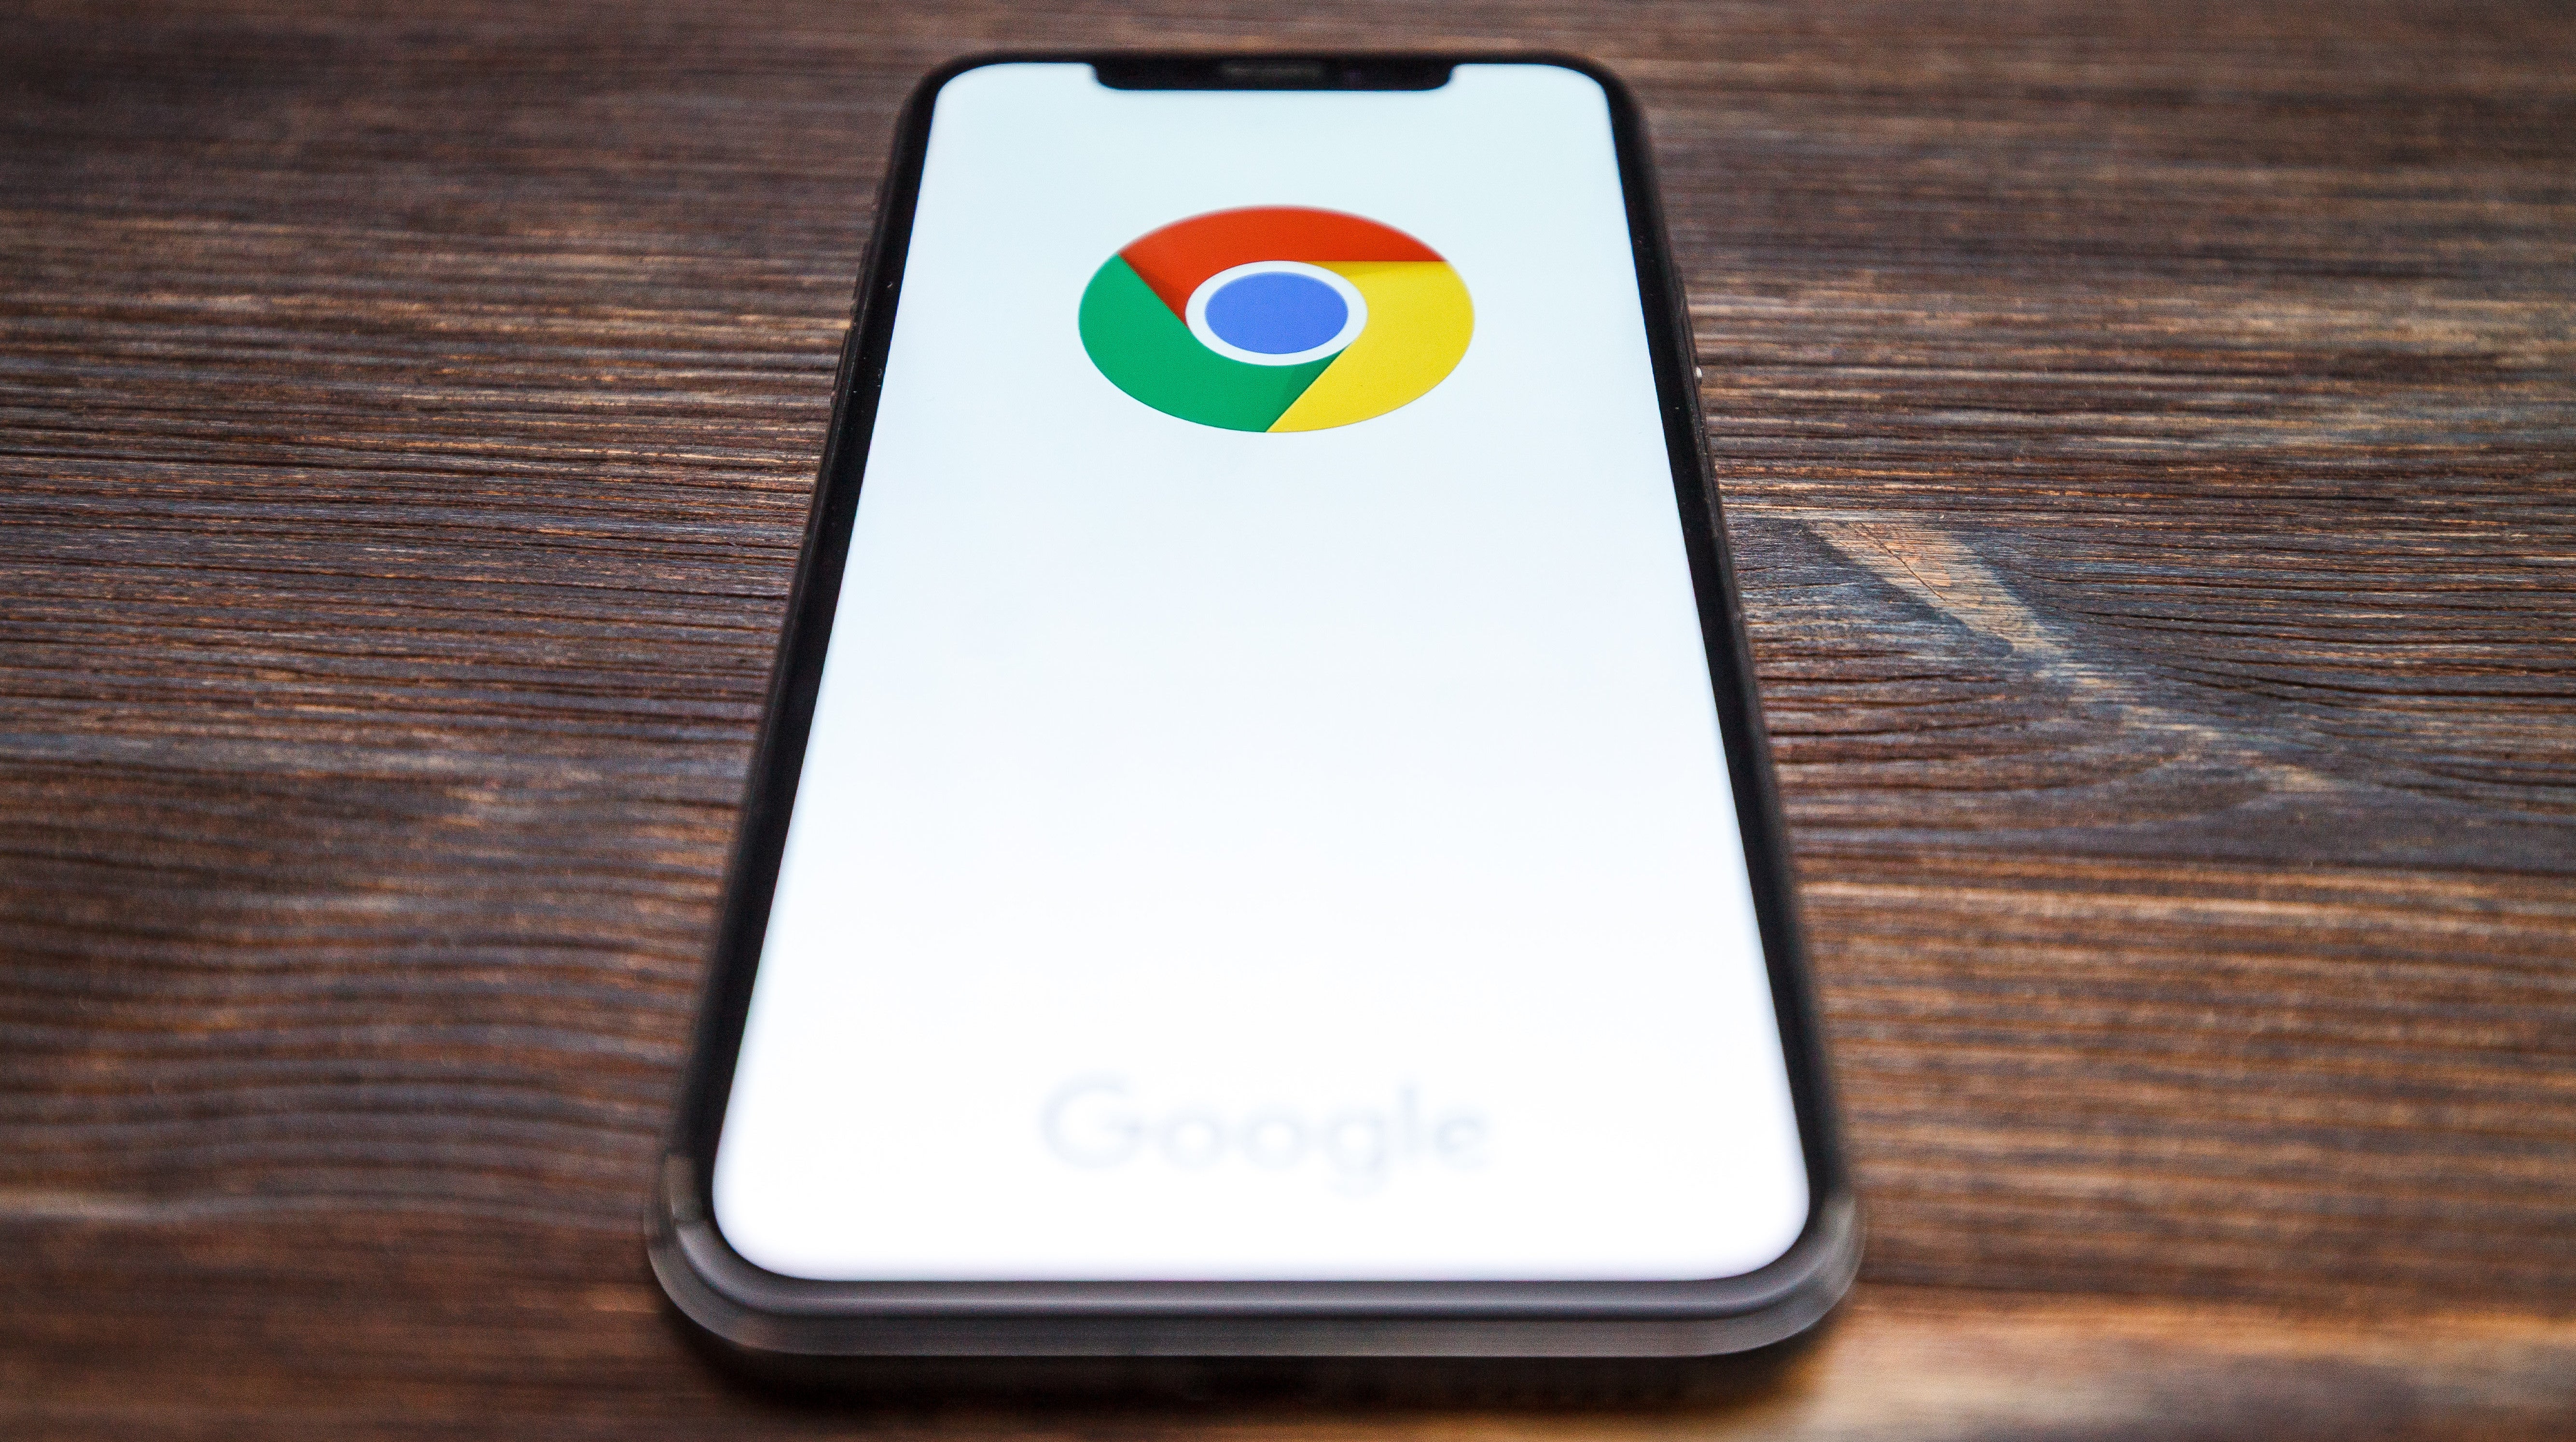 How To Enable Chrome’s Hidden Dark Mode And Secure Password Features